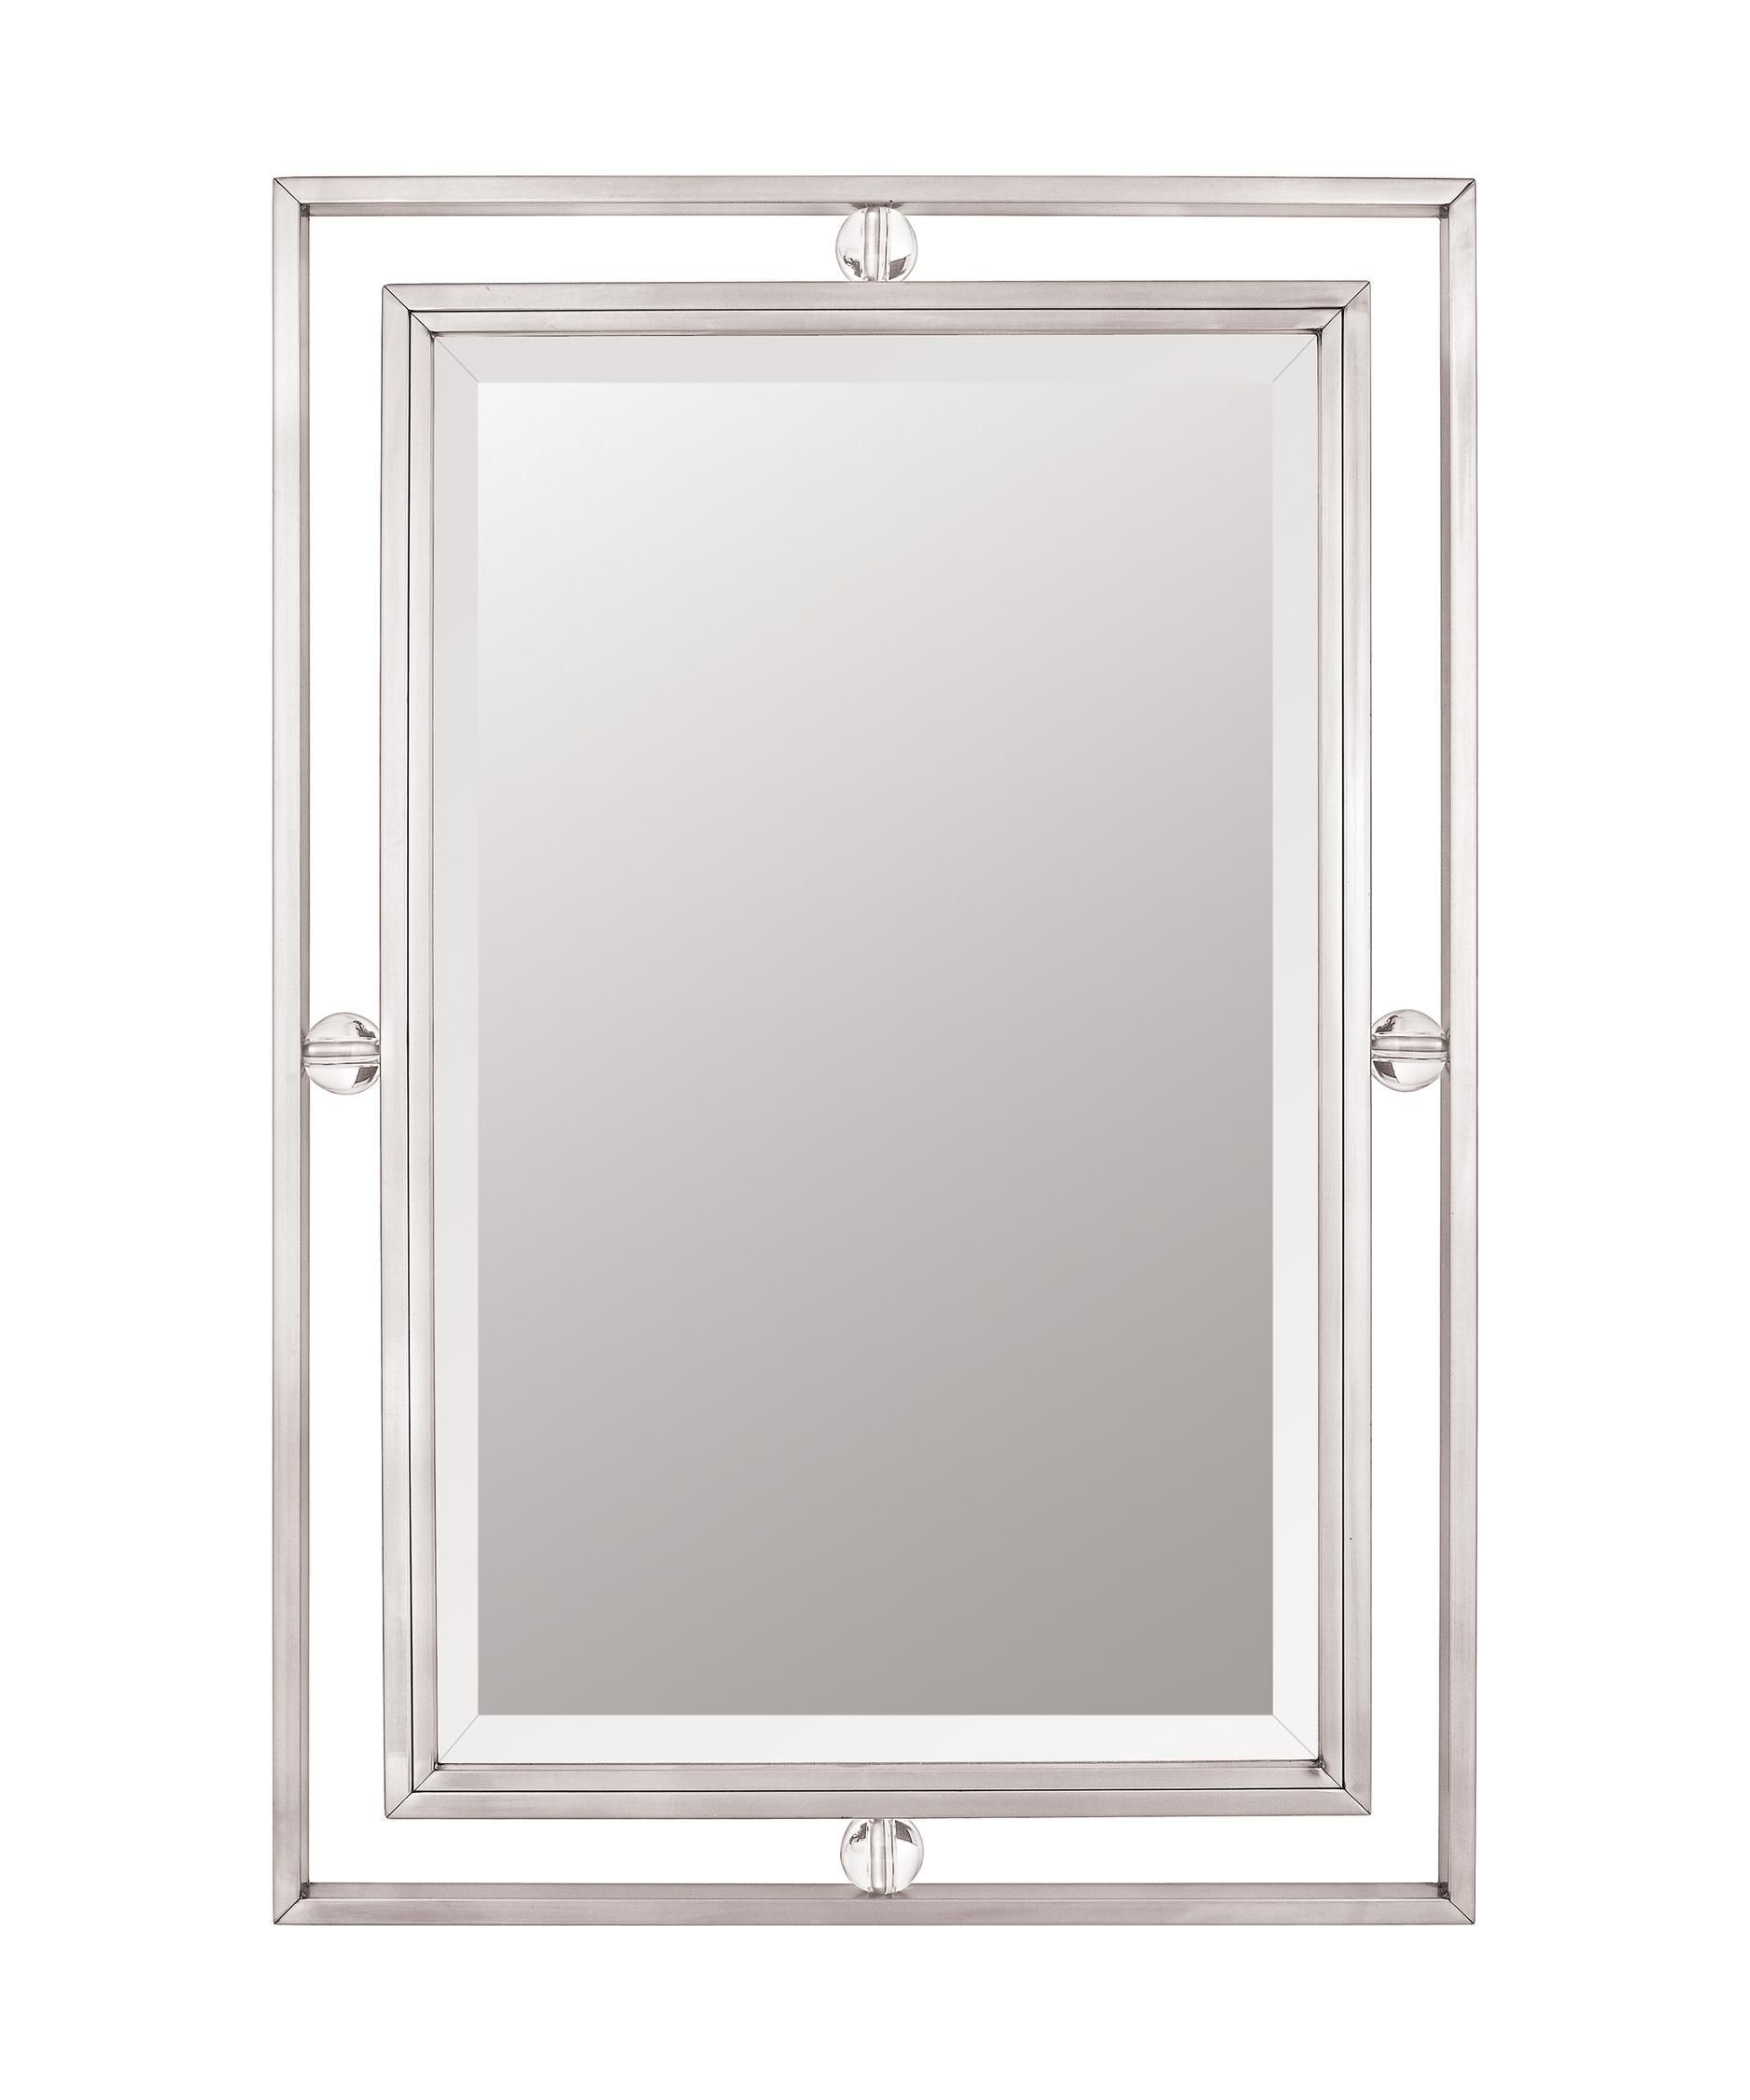 Quoizel Dw43222 Downtown Rectangular Wall Mirror | Rectangular Bathroom In Brushed Nickel Wall Mirrors (View 11 of 15)